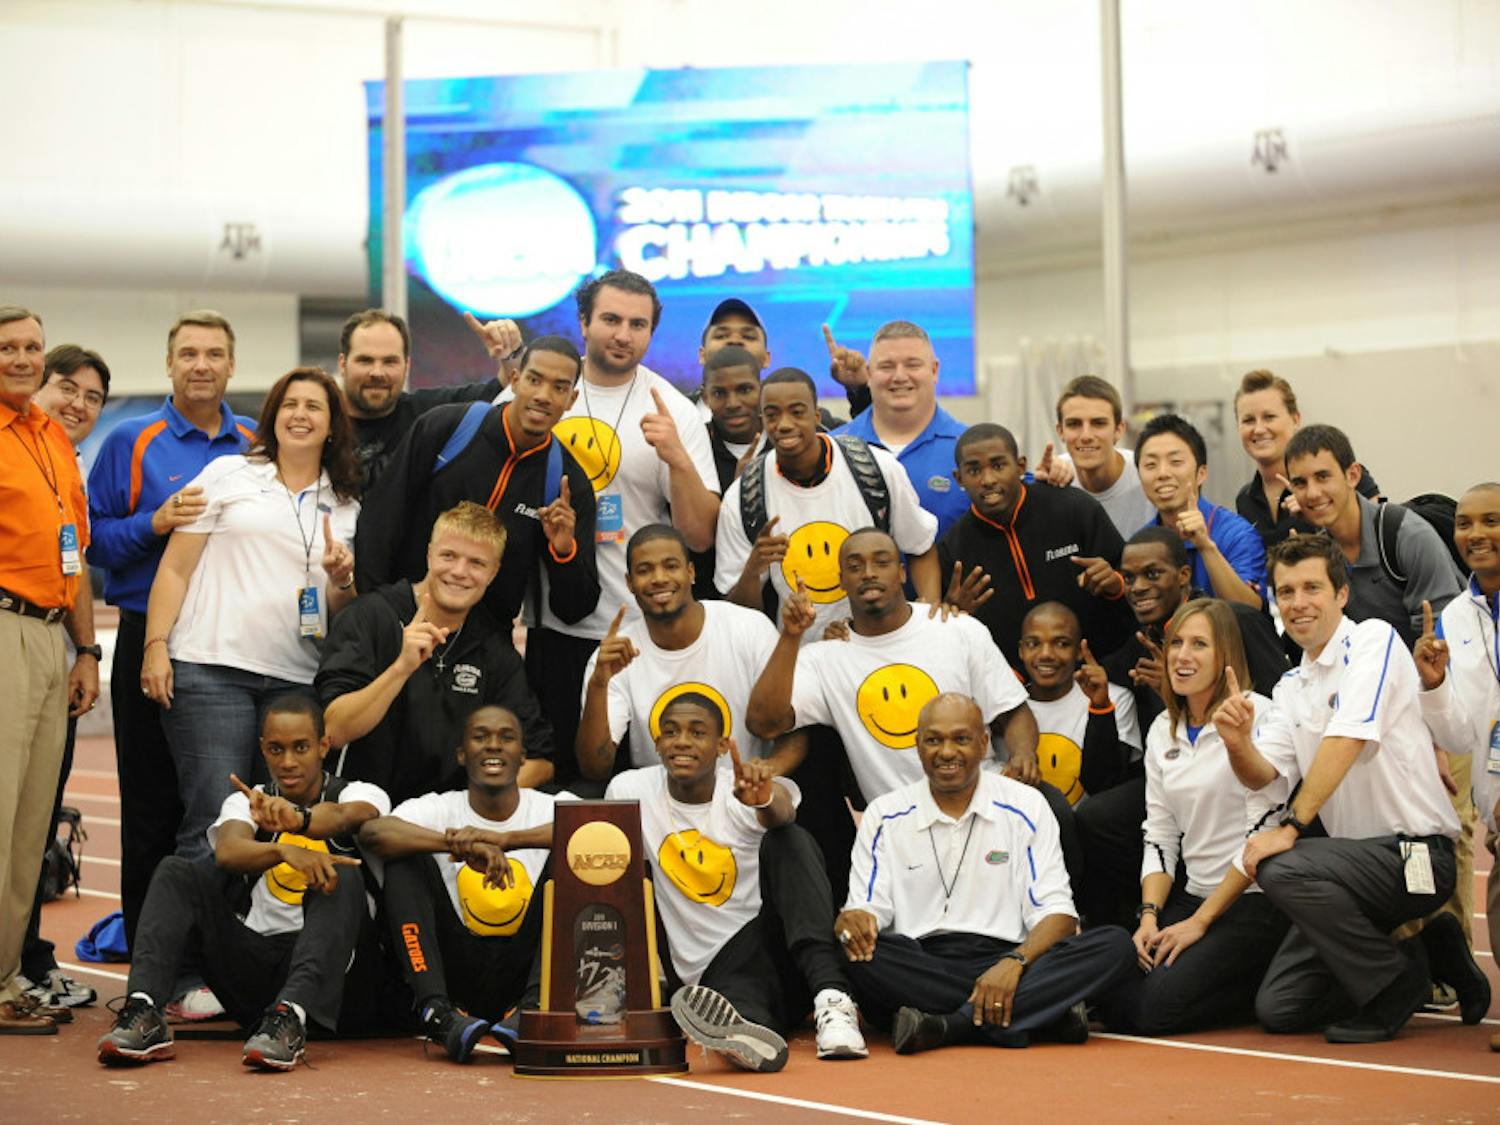 Florida won the 2011 NCAA Indoor Track & Field Championship on Saturday in College Station, Texas, becoming just the fourth team ever to repeat.